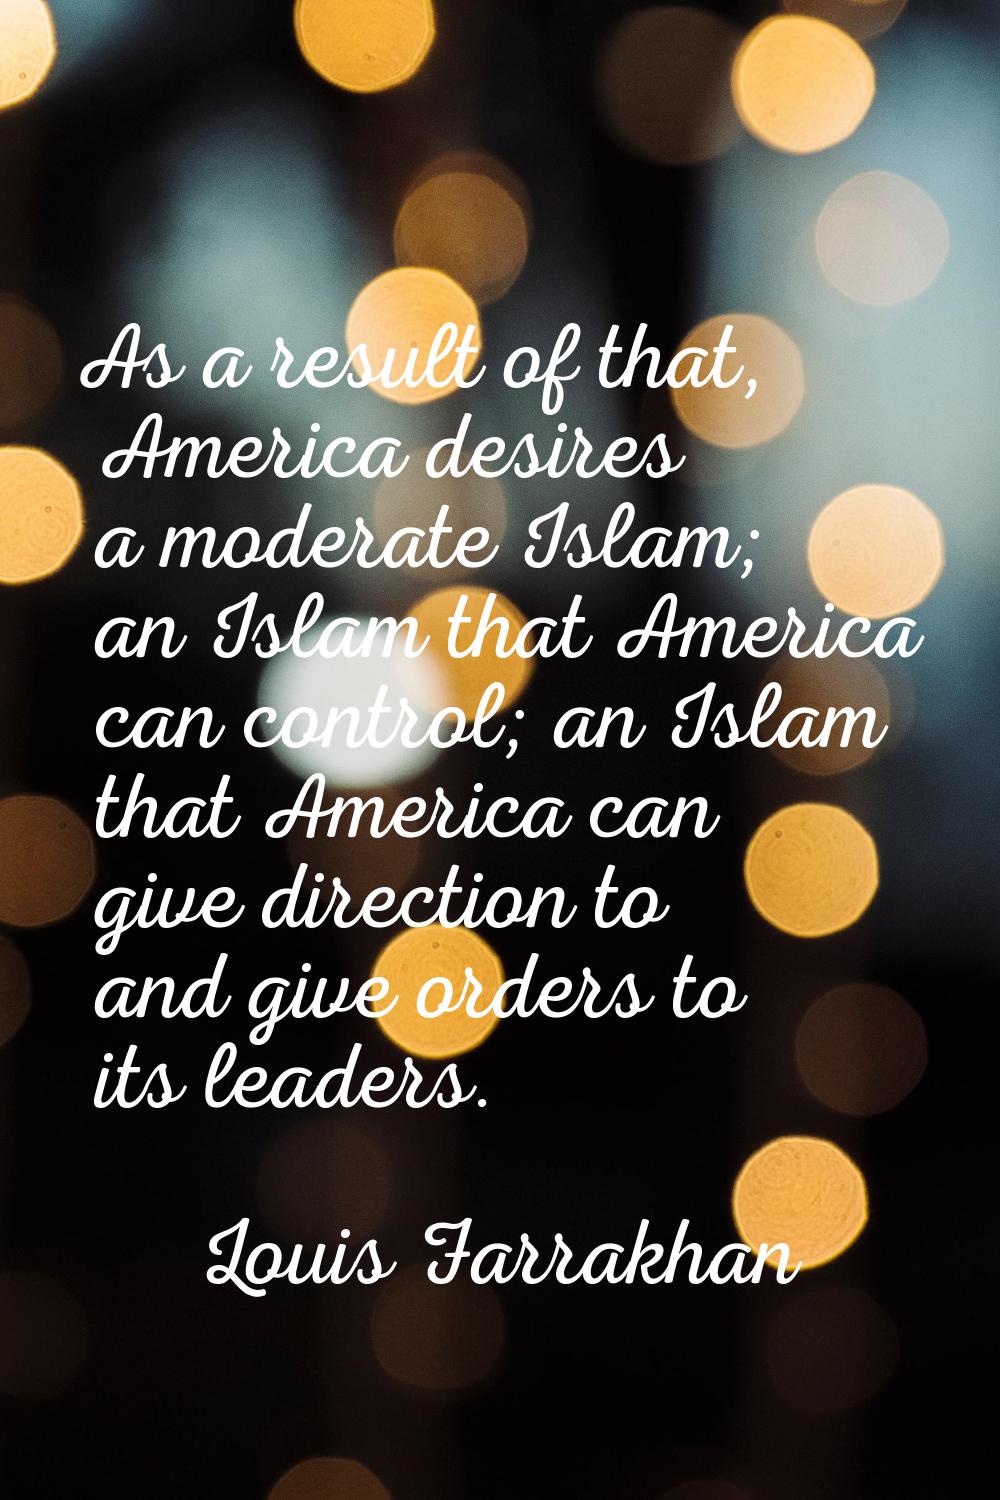 As a result of that, America desires a moderate Islam; an Islam that America can control; an Islam 